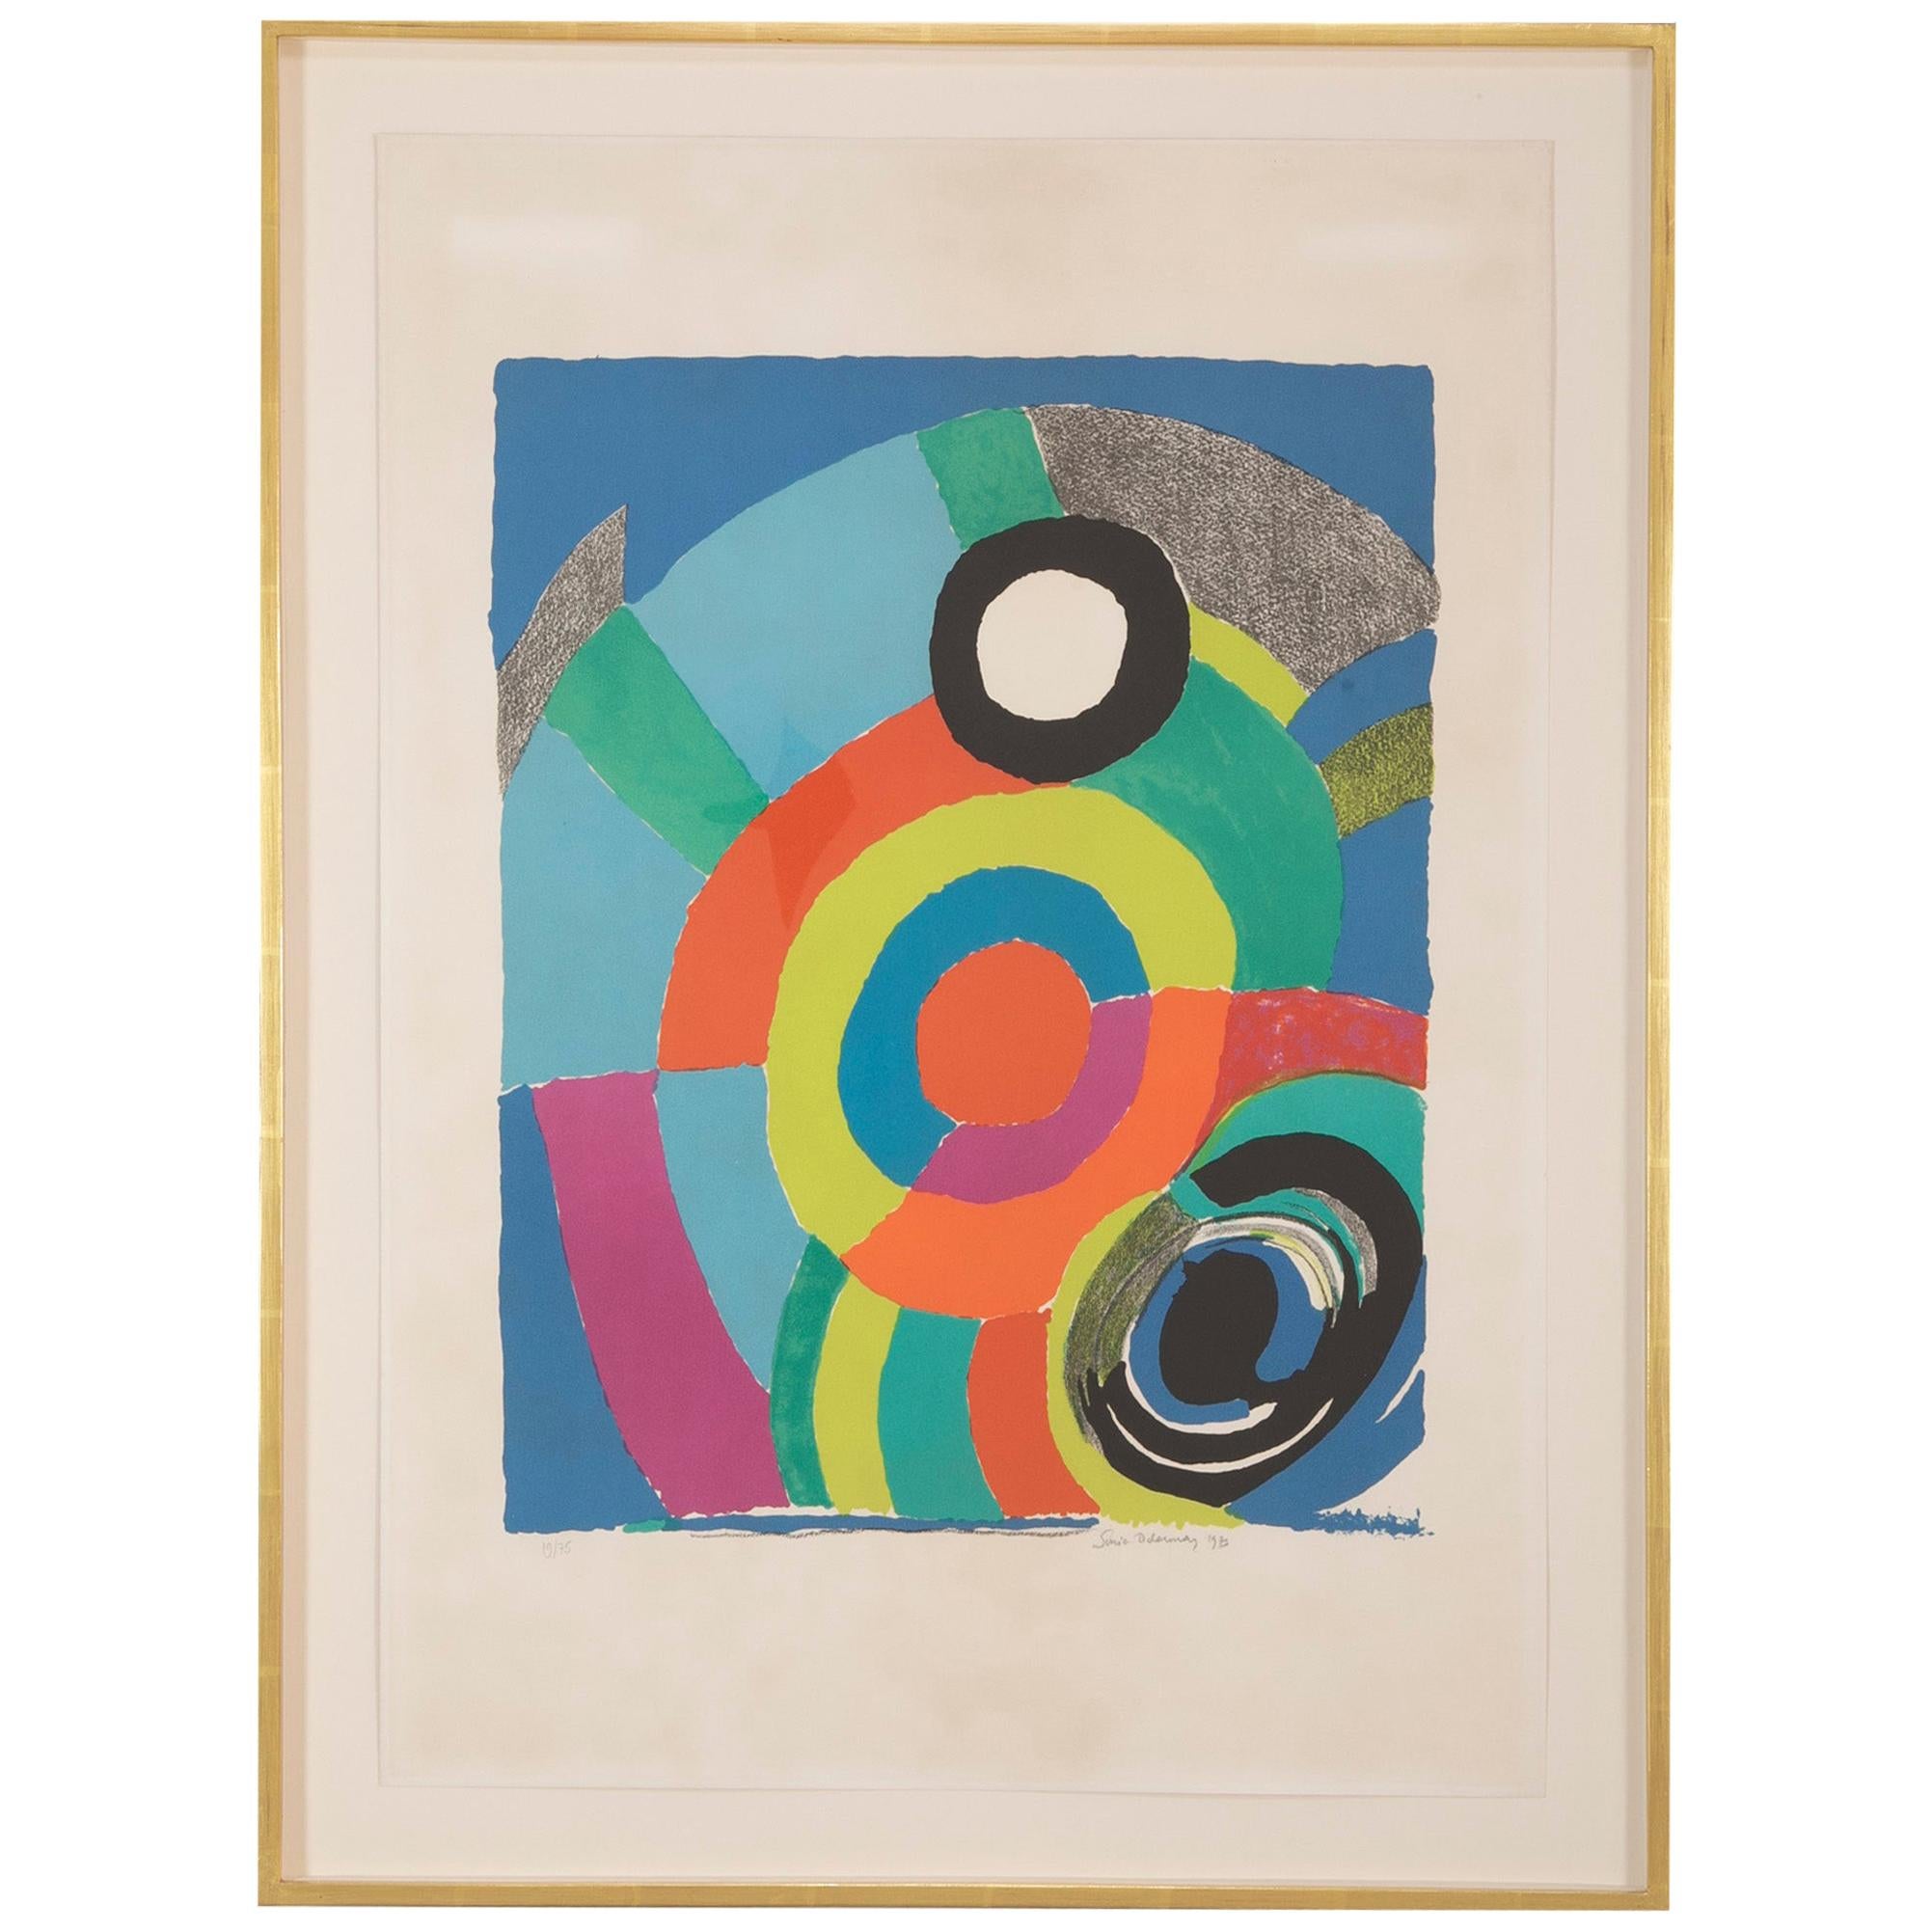 "Tourbillion. 1979" Lithograph in Colors by Sonia Delaunay